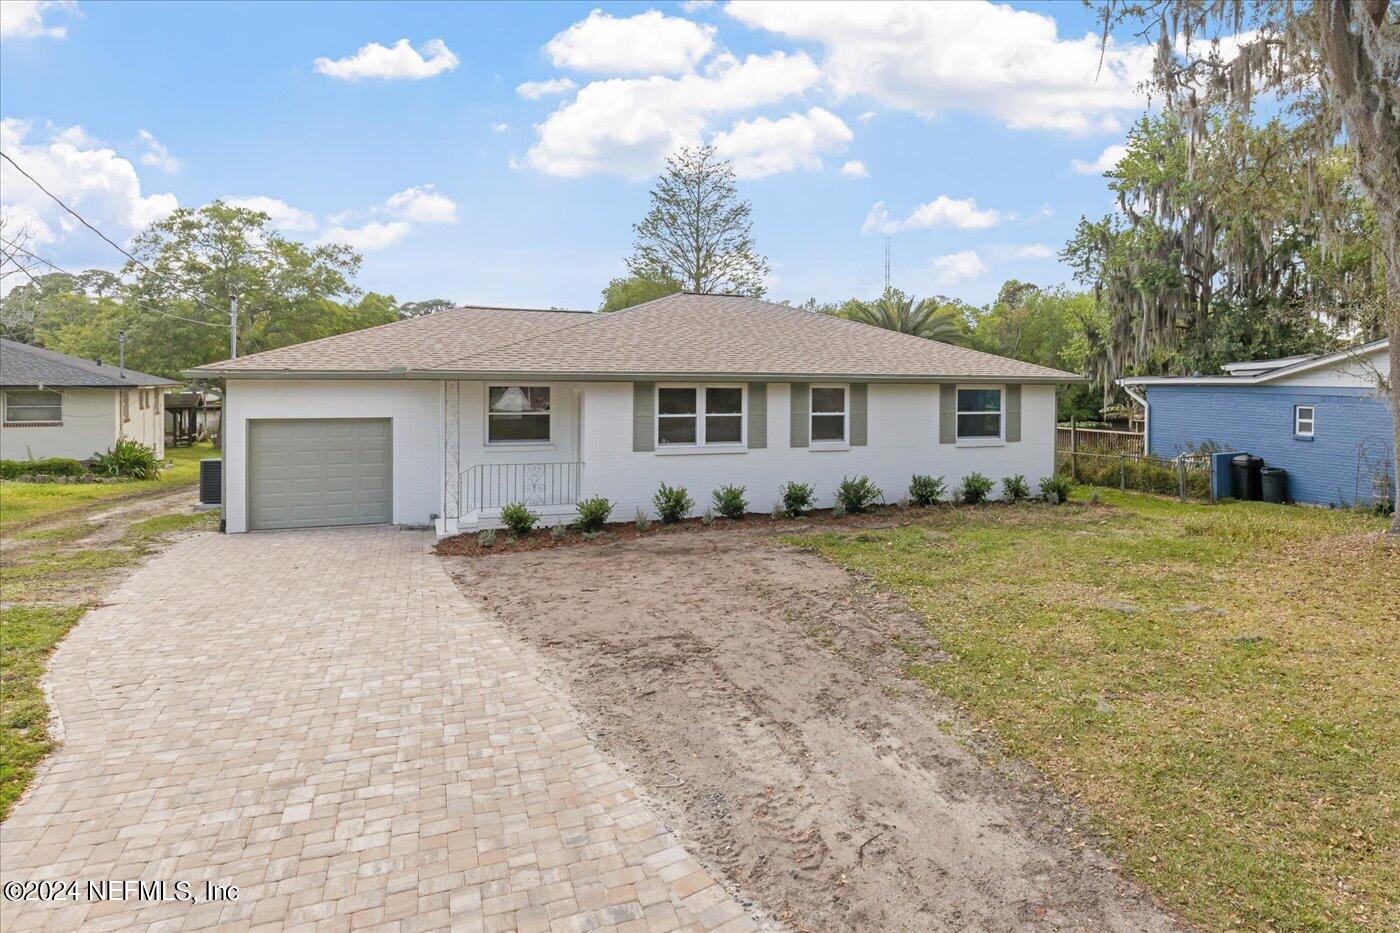 Jacksonville, FL home for sale located at 5428 WATERSIDE Drive, Jacksonville, FL 32210